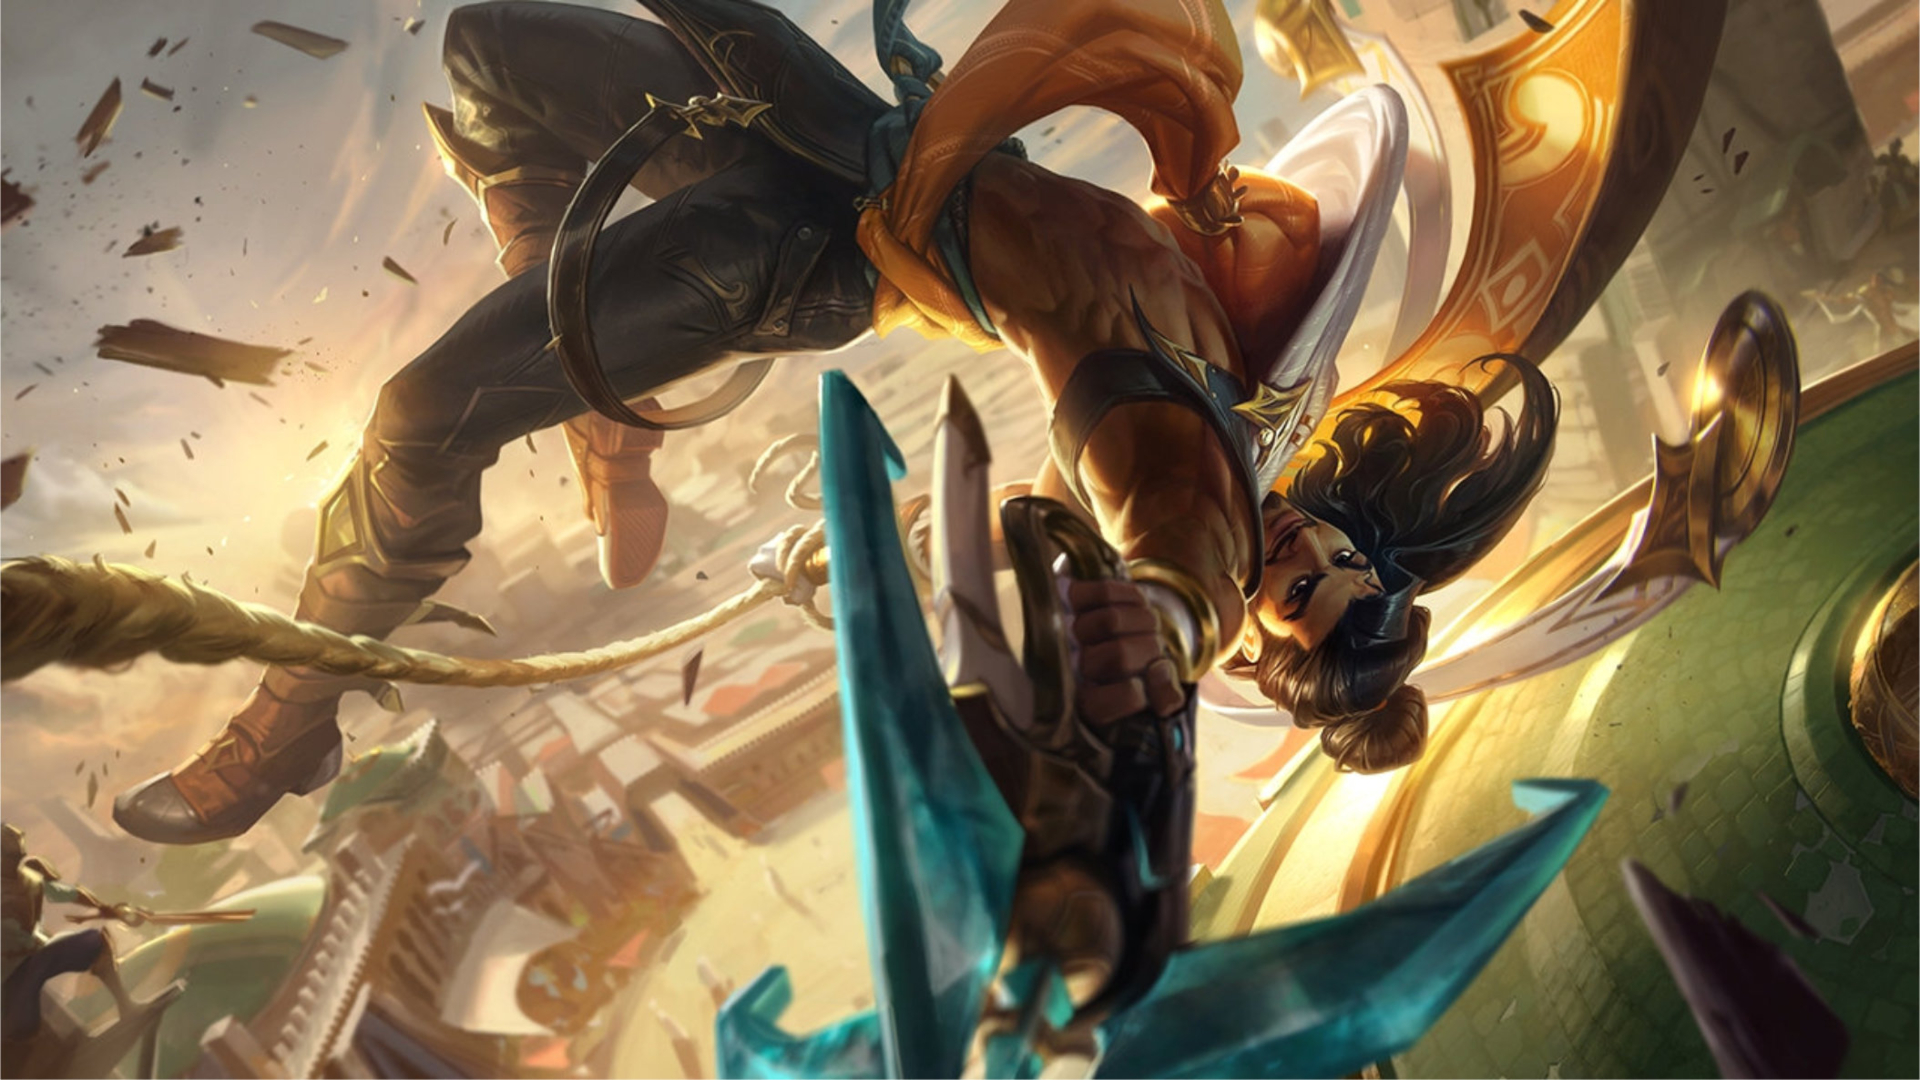 Senna enters the Rift: Starting out with League's newest champion